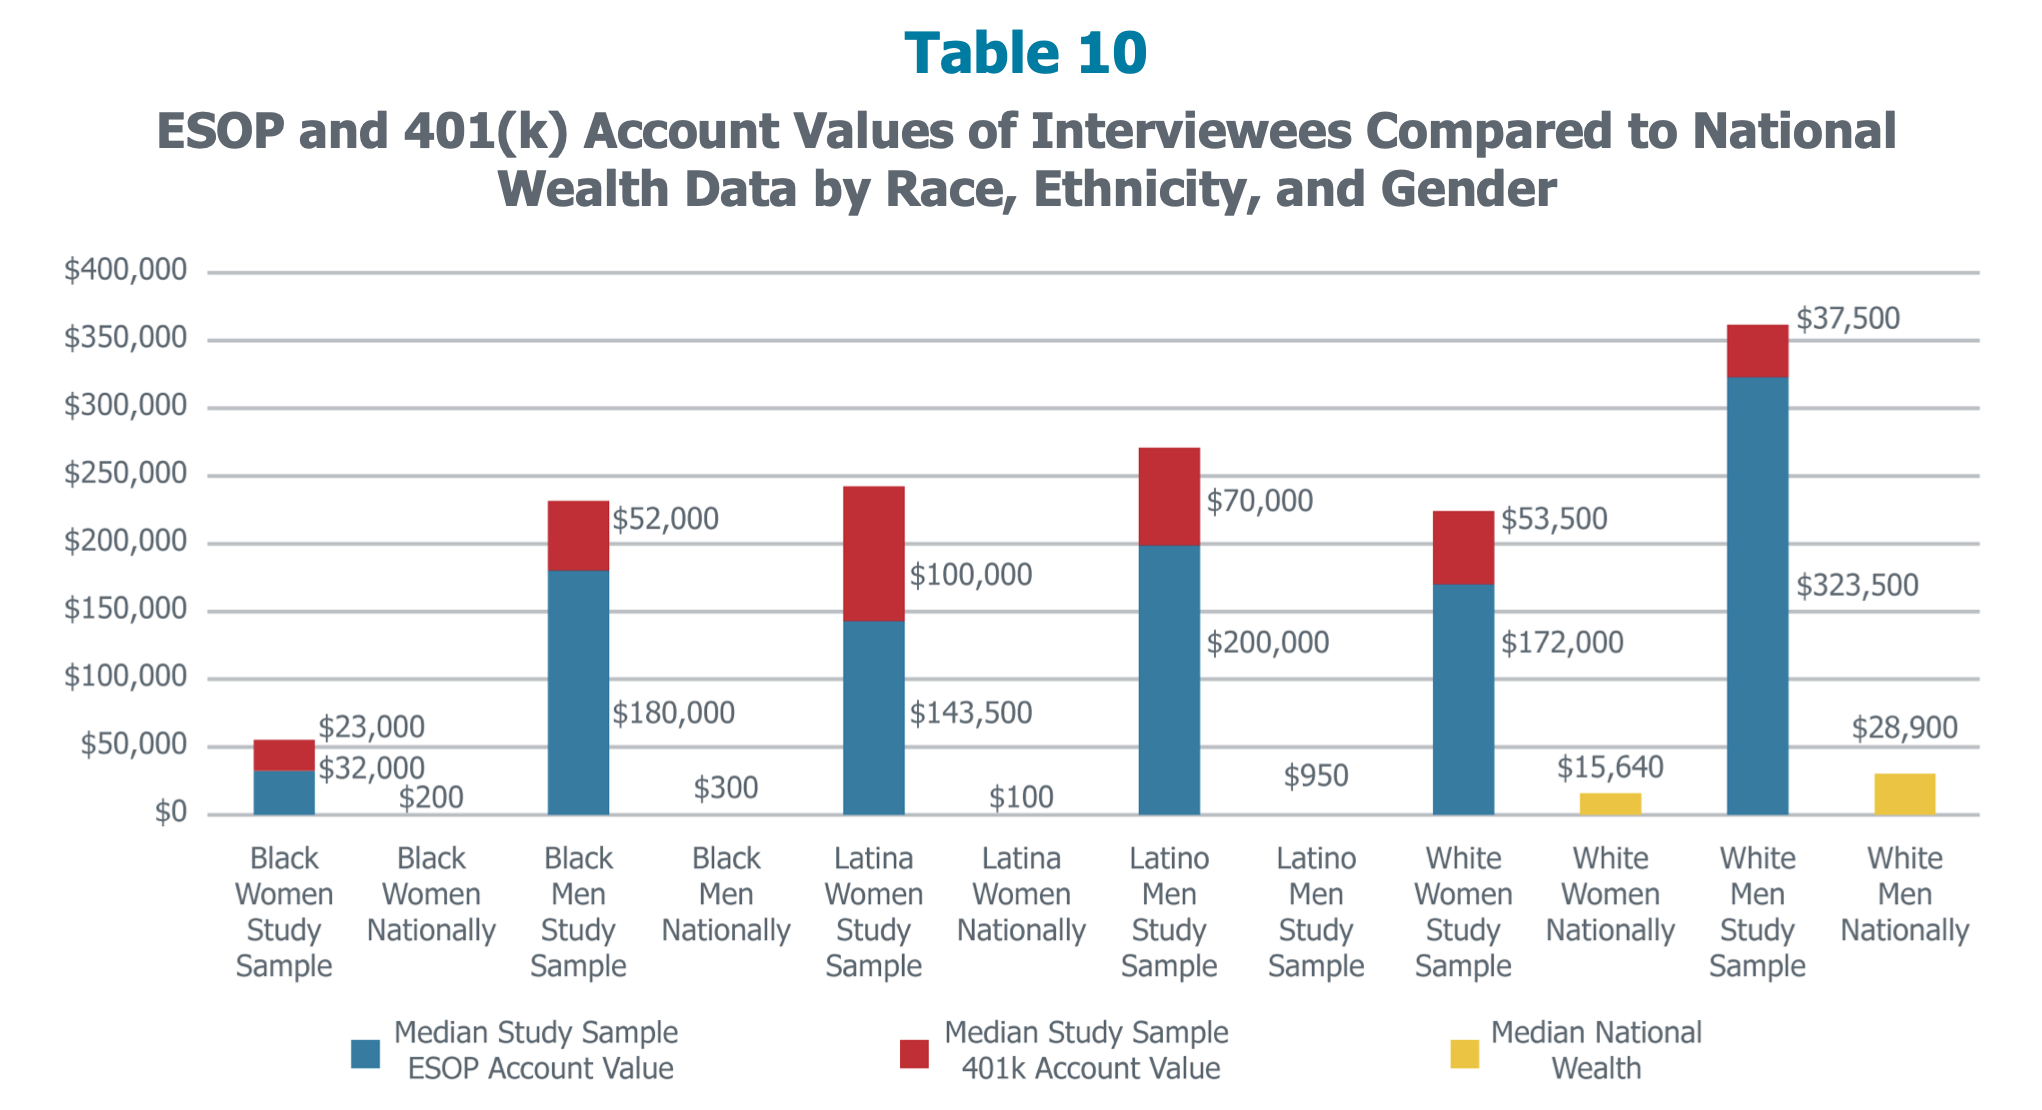 Table from Building the Assets of Low and Moderate Income Workers and their Families depicting ESOP and 401(k) account values of interviewees compared to national wealth data by race, ethnicity, and gender